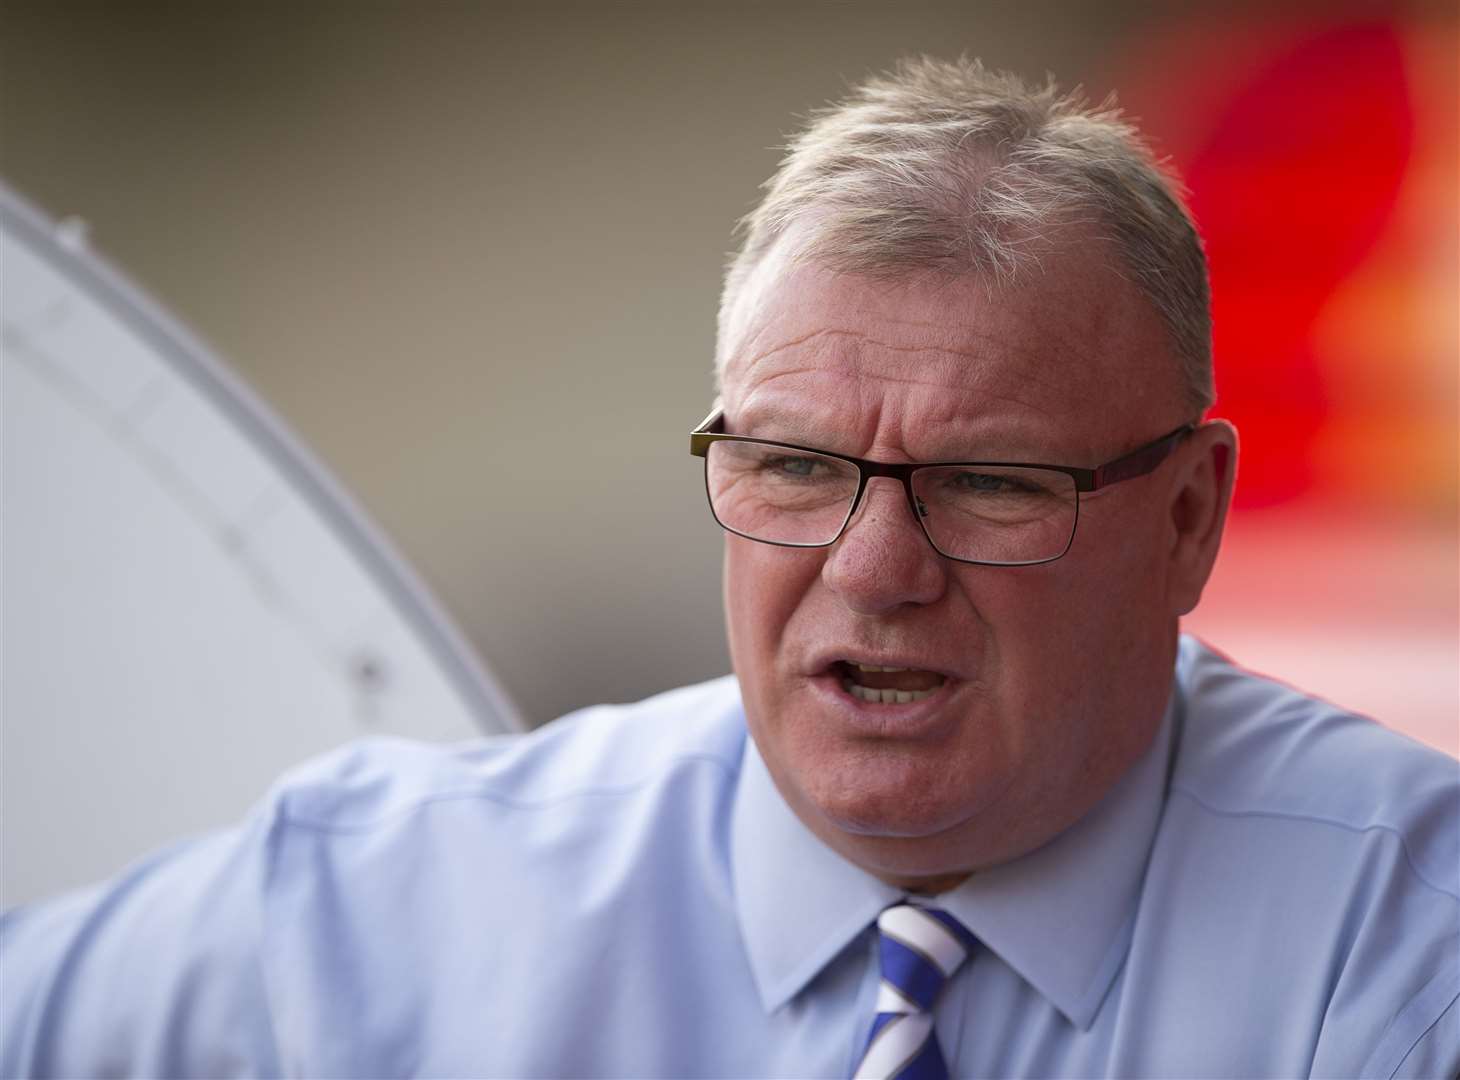 Gillingham manager Steve Evans is waiting on a decision about the League 1 season